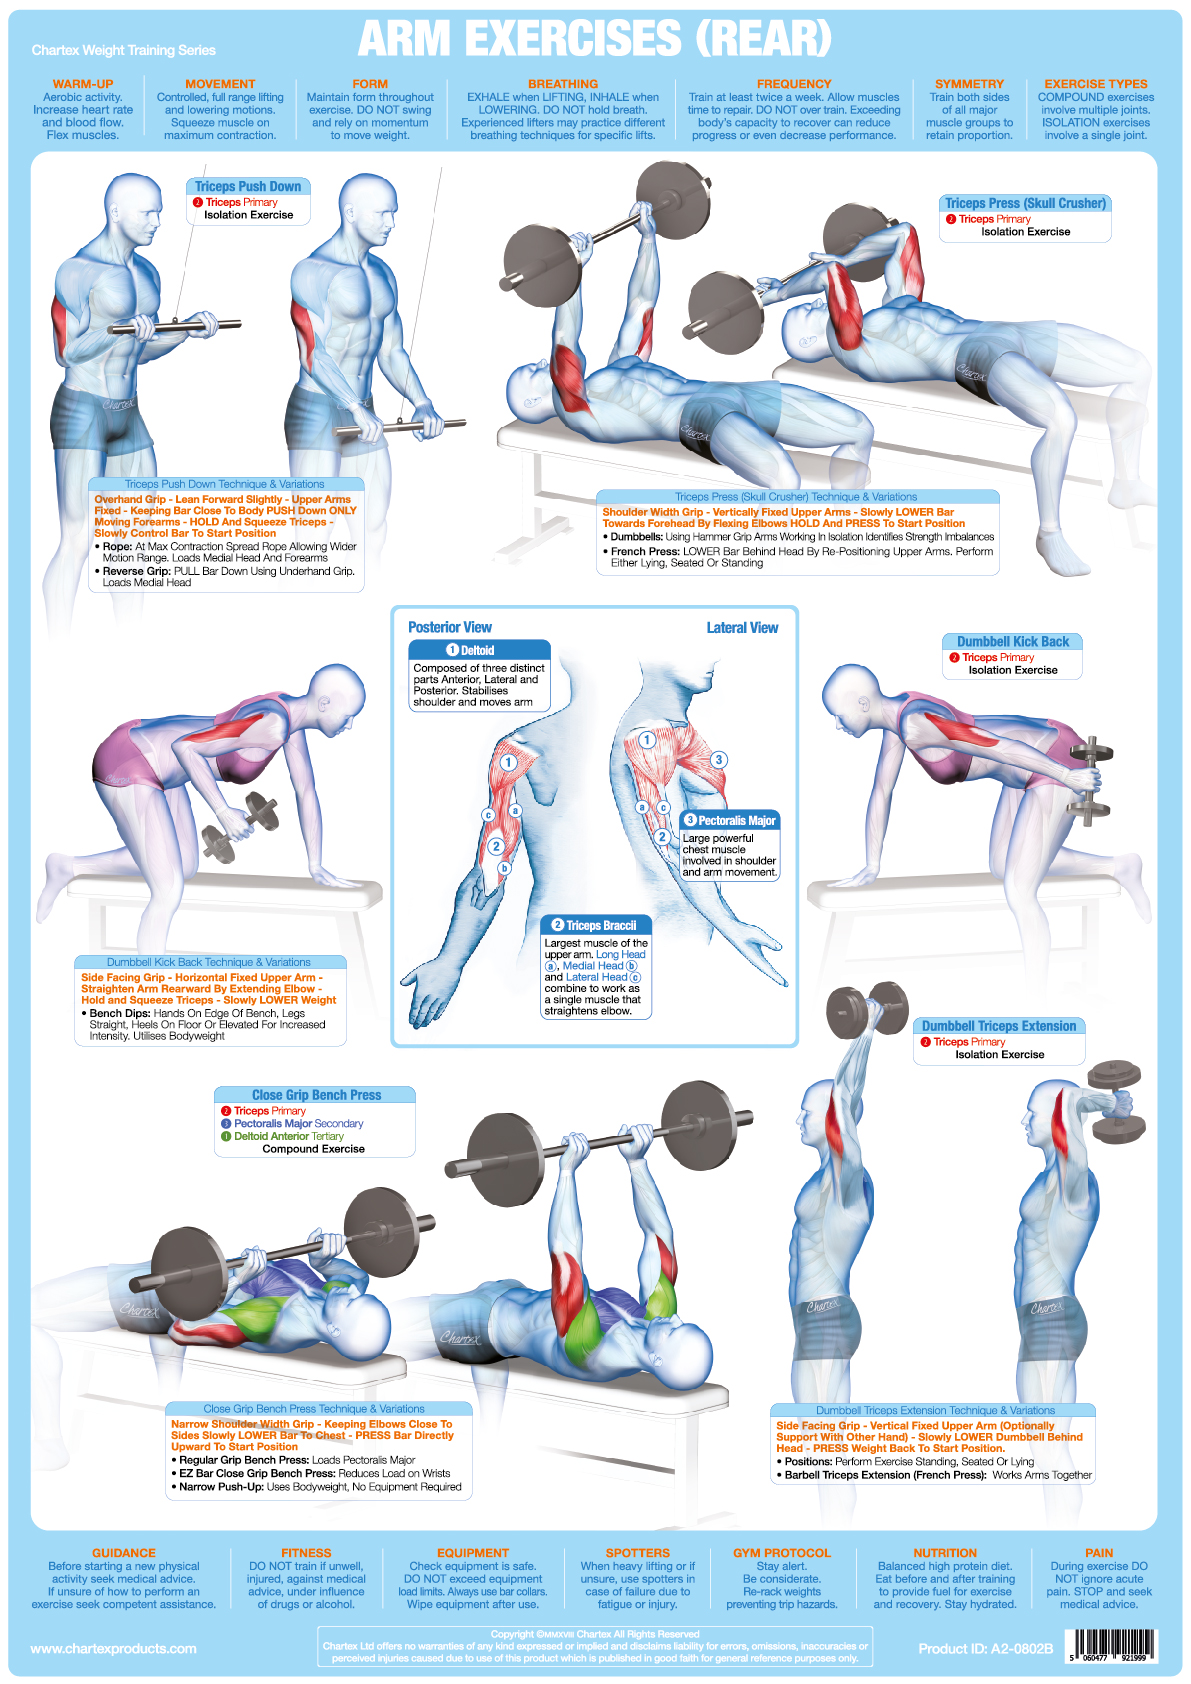 Arm Muscles (Rear) Weight Training - A1 Chart